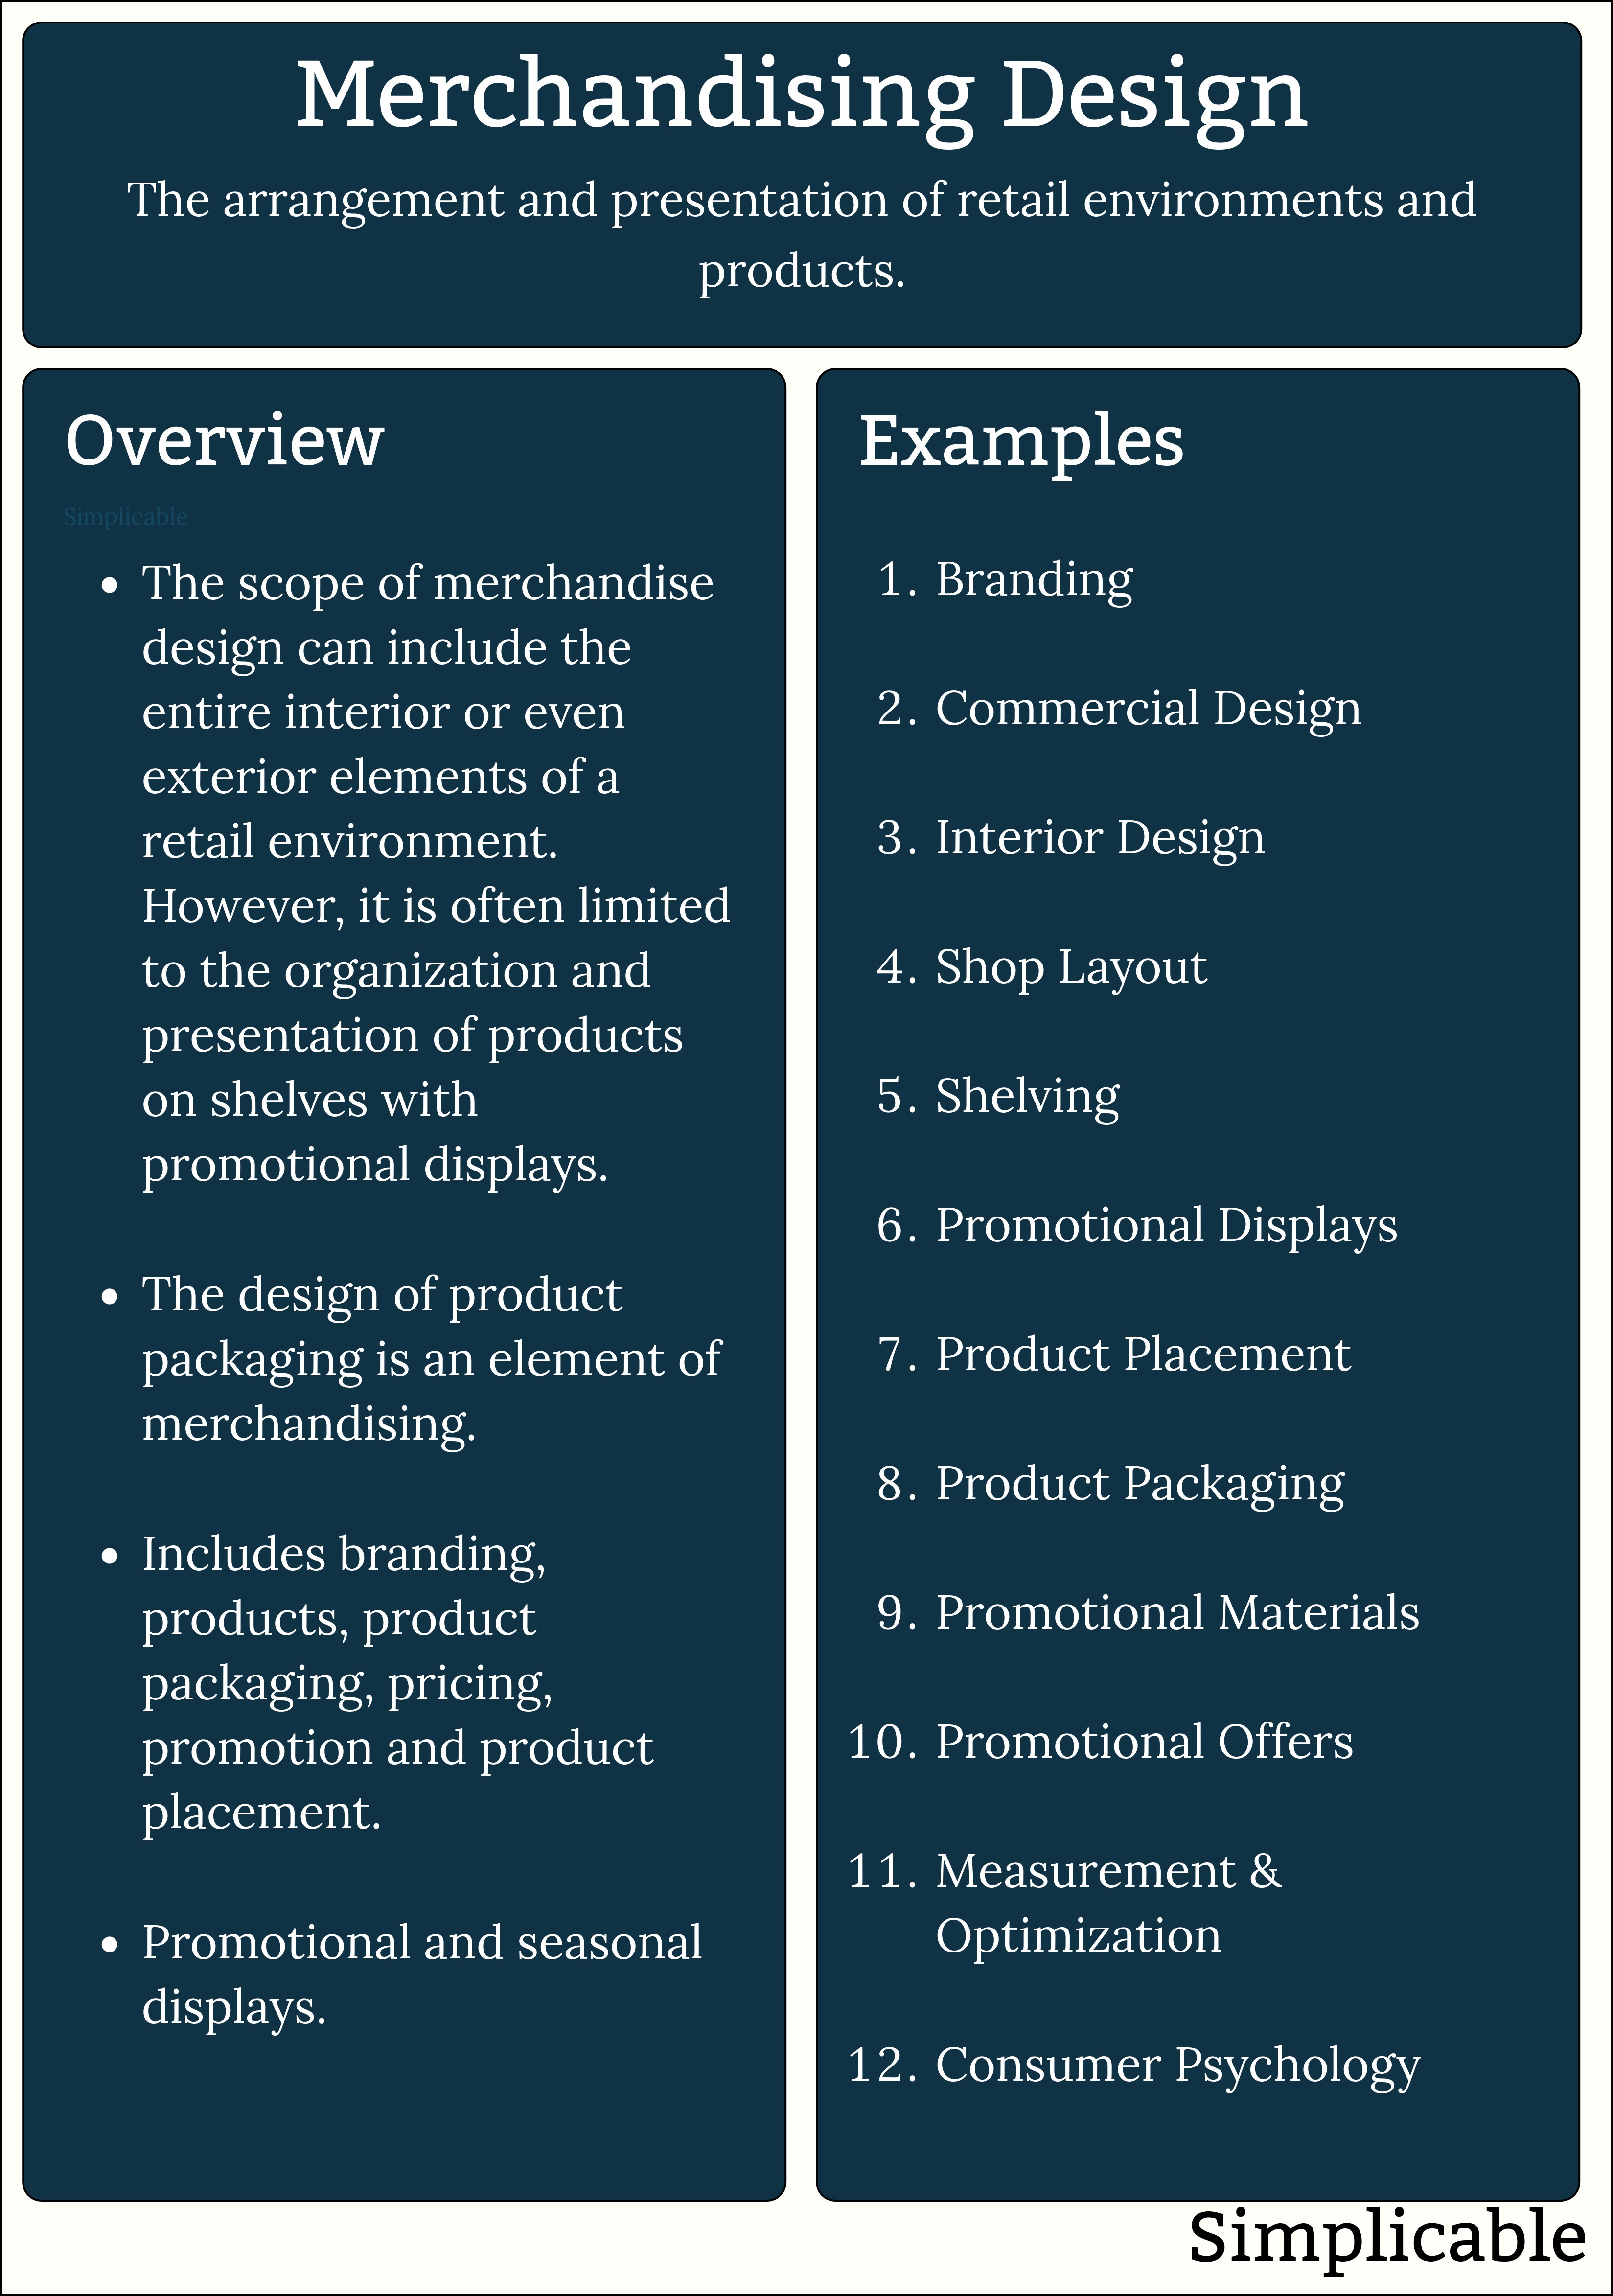 merchandising design overview and examples